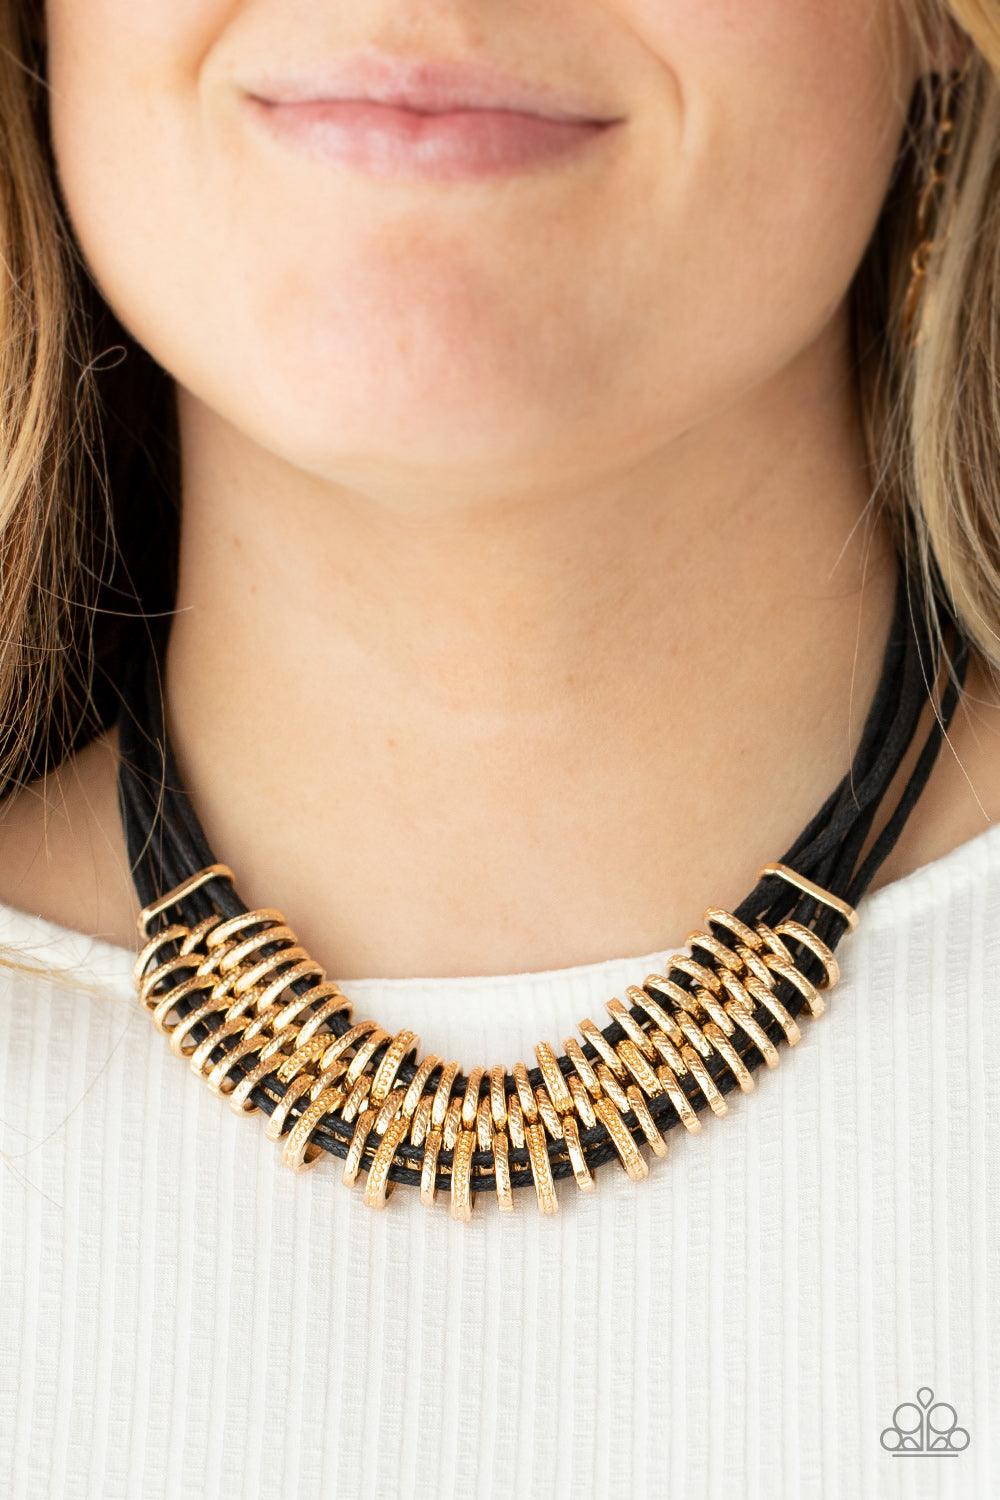 Paparazzi Accessories Lock, Stock, and SPARKLE - Gold Bold and unapologetic, this hefty necklace gives off a hand-made feel with its multiple strands of black cording held together by industrial gold fittings that shift and slide. Features an adjustable c